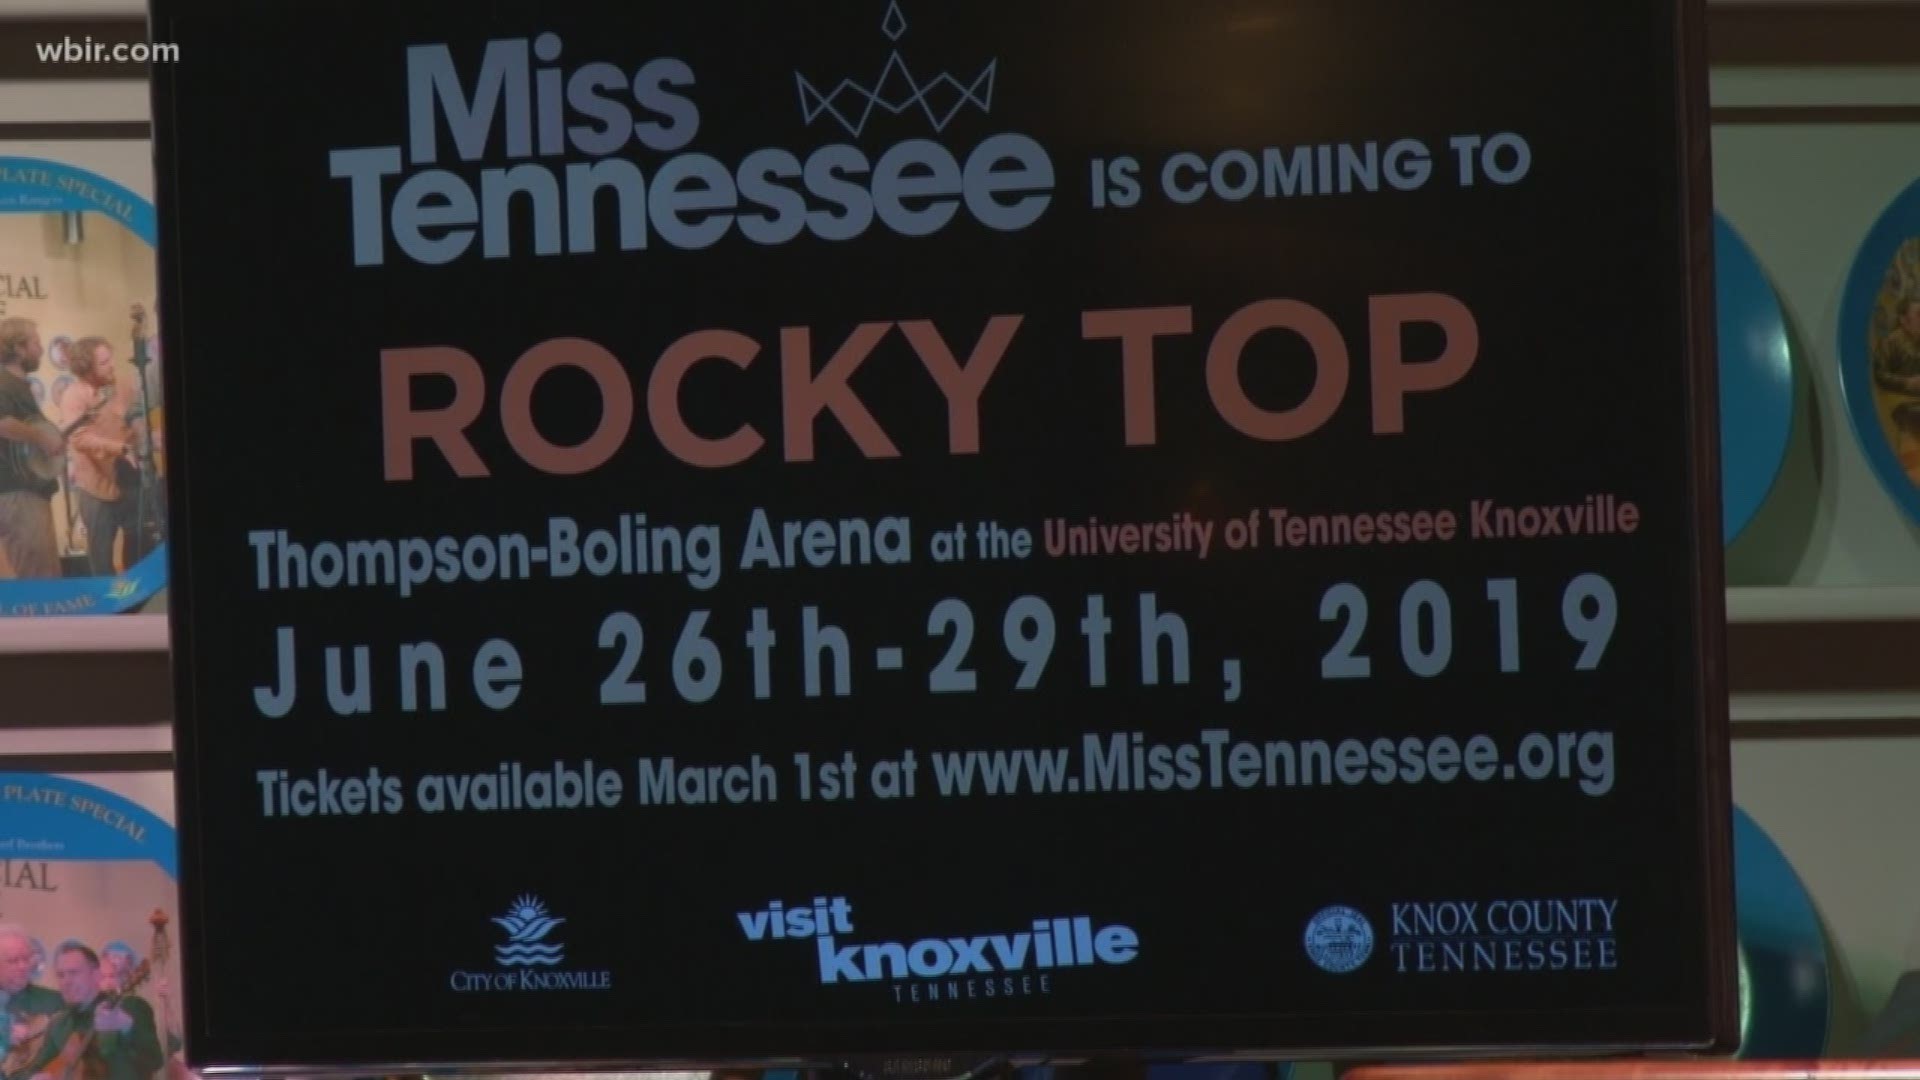 The competition will take place at Thompson Boling Arena from June 26th to the 29th. Tickets for the competition go on sale in March.